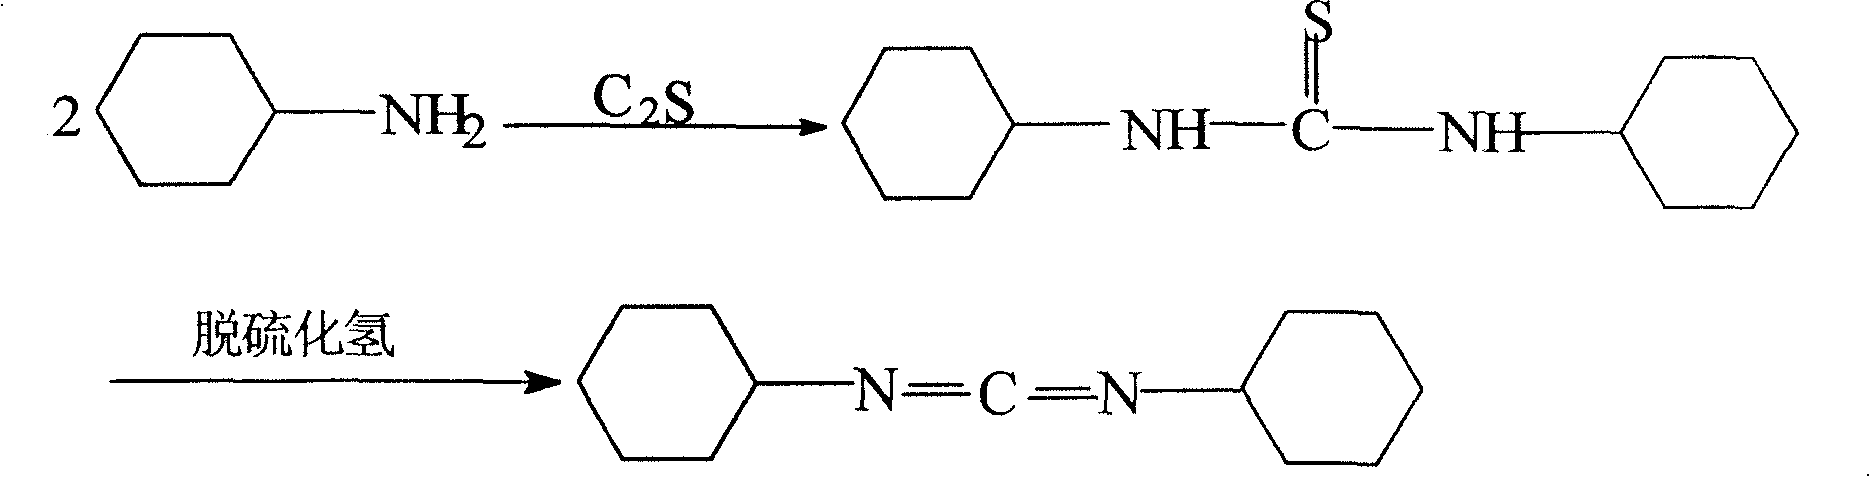 Production technique of N,N'-dicyclo hexylcar bodiimide